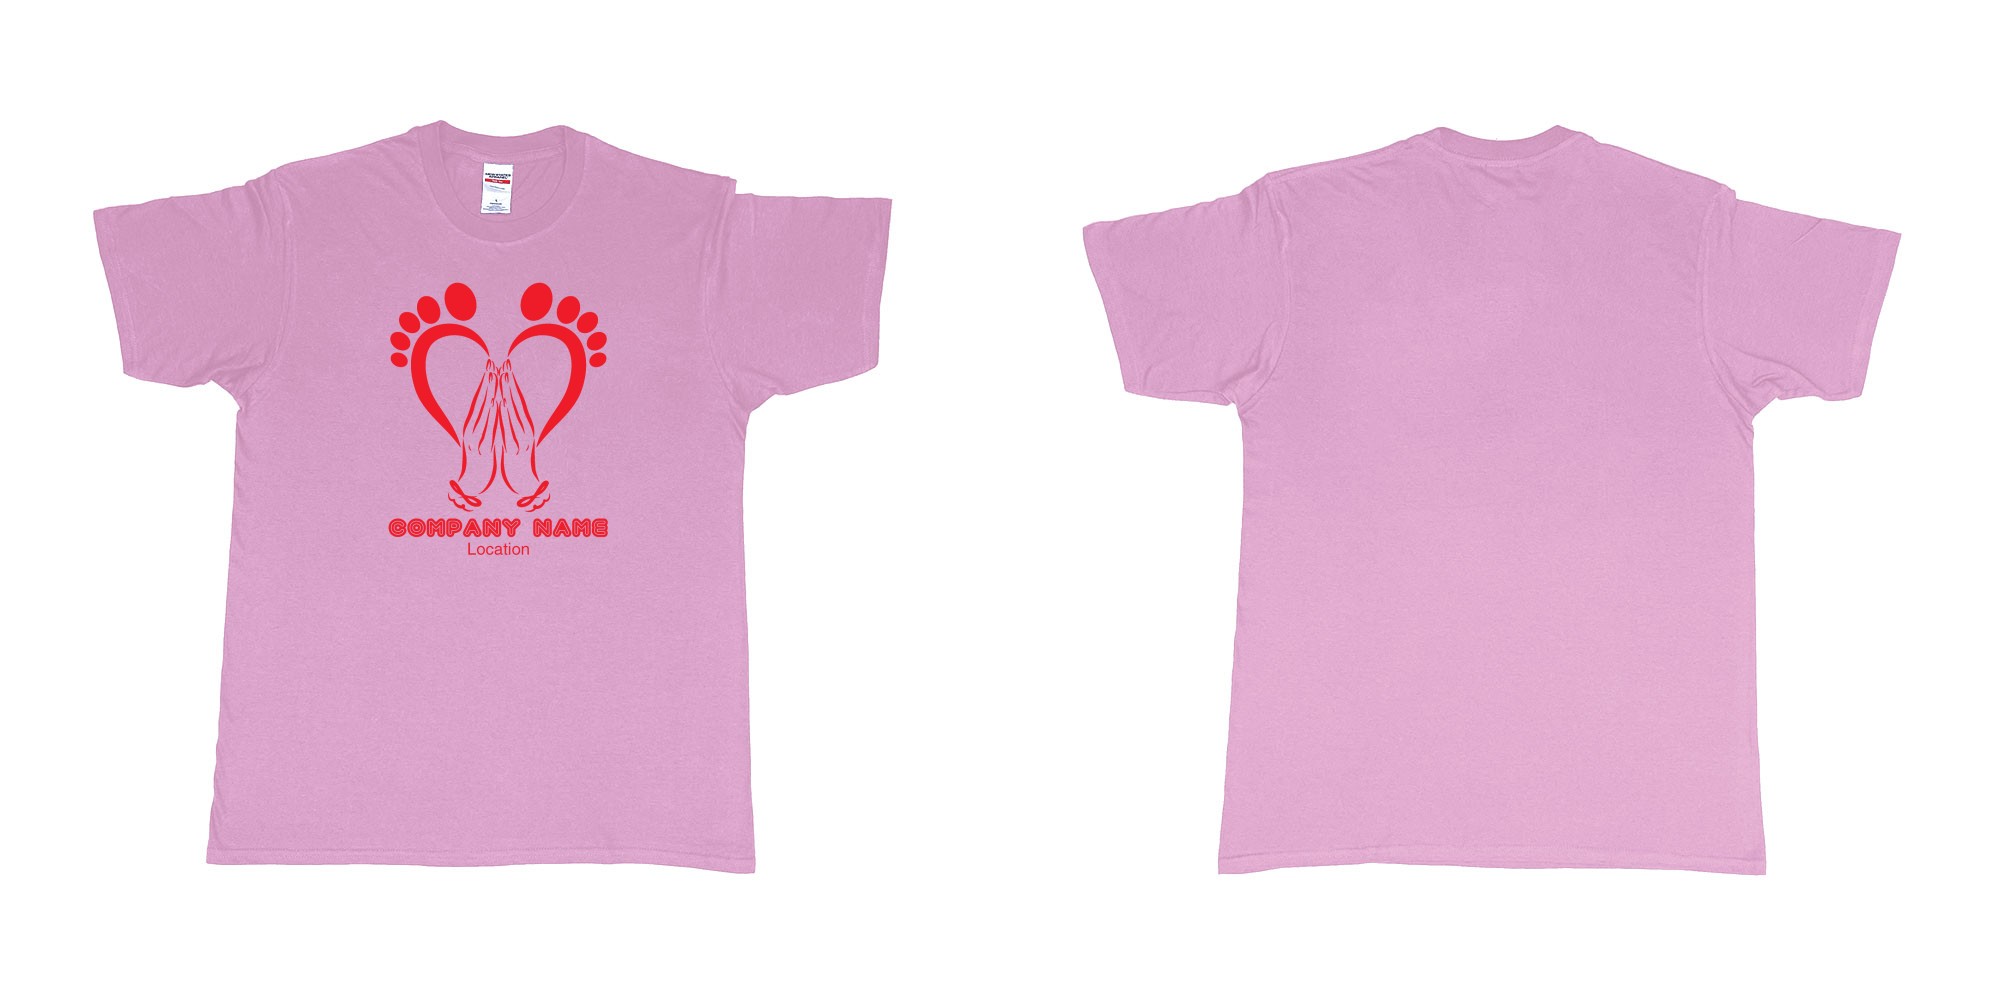 Custom tshirt design  in fabric color light-pink choice your own text made in Bali by The Pirate Way